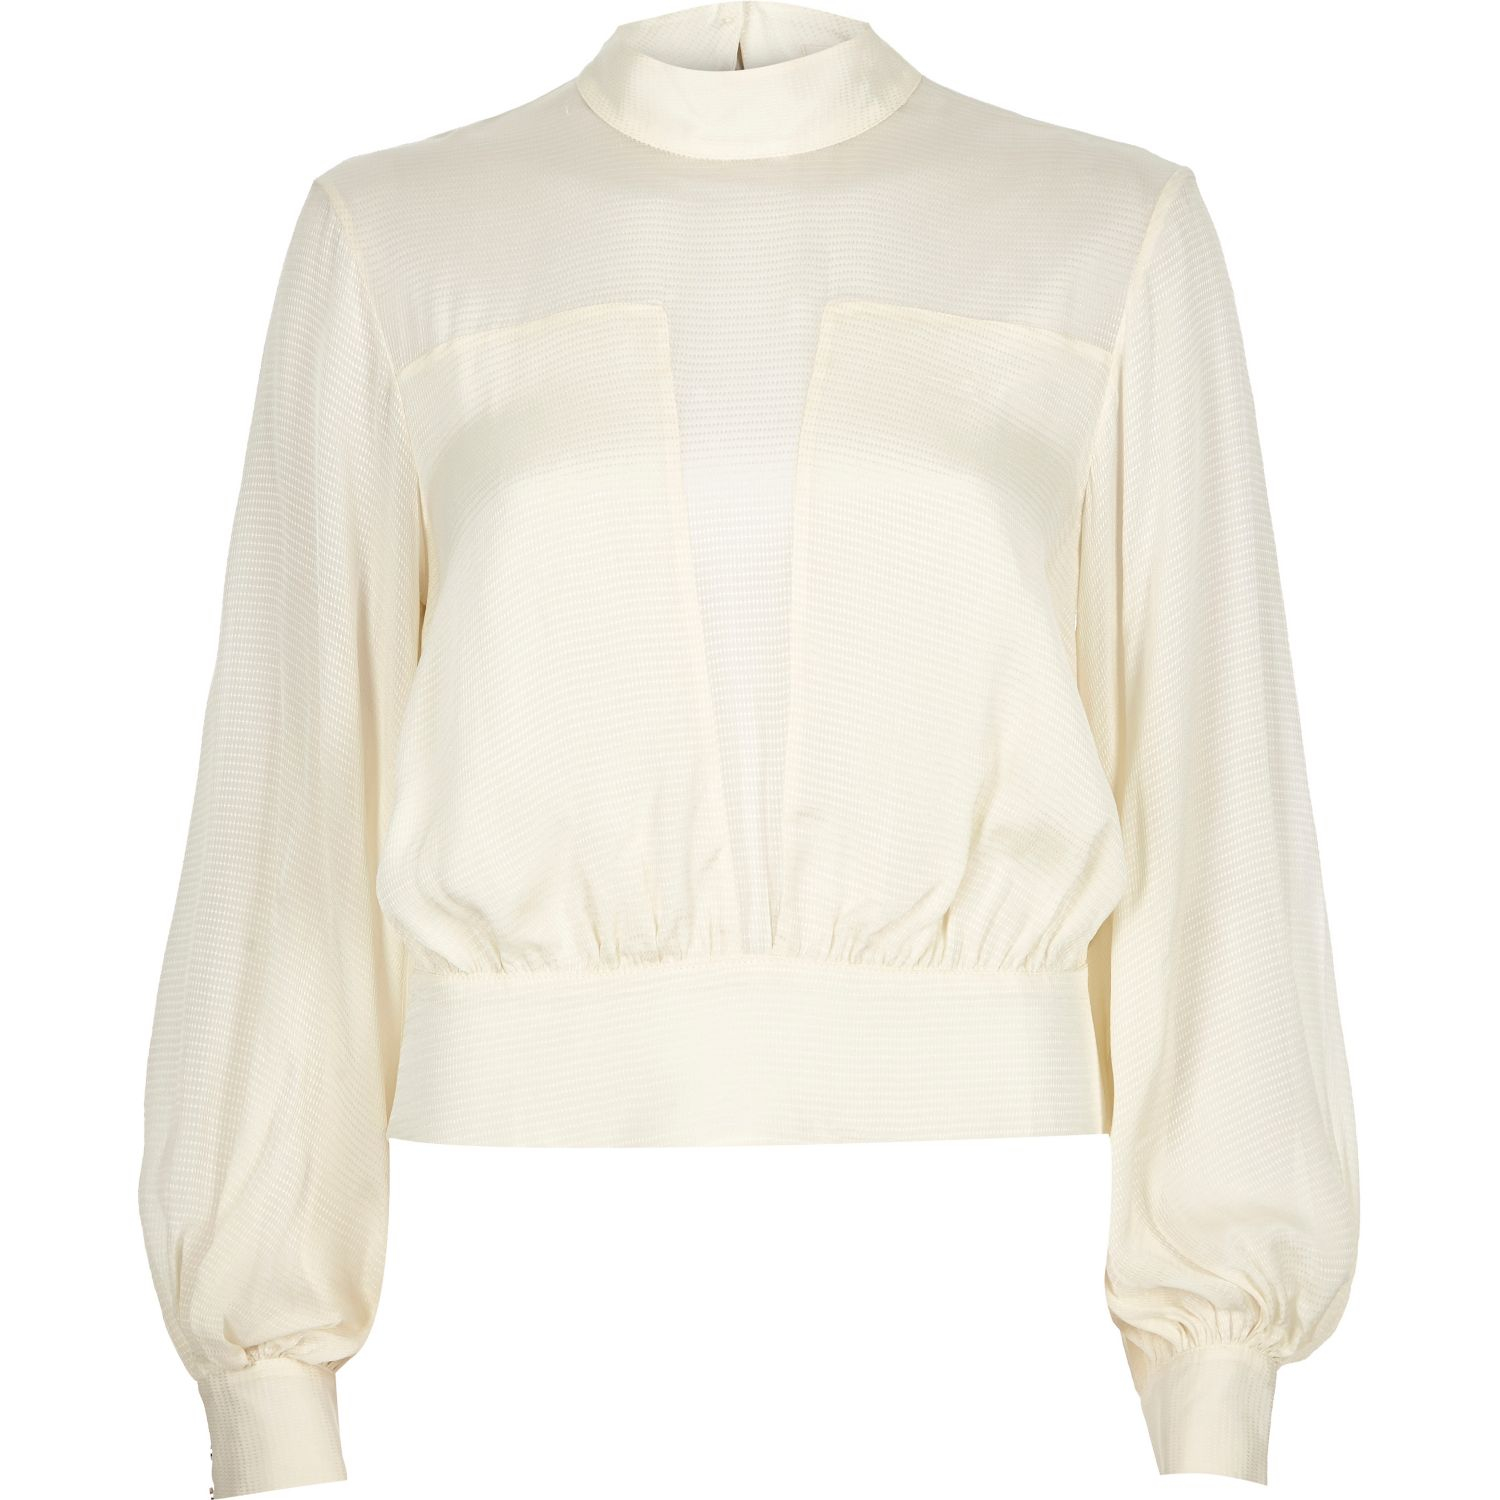 River Island Cream Sheer High Neck Blouse in Natural | Lyst UK